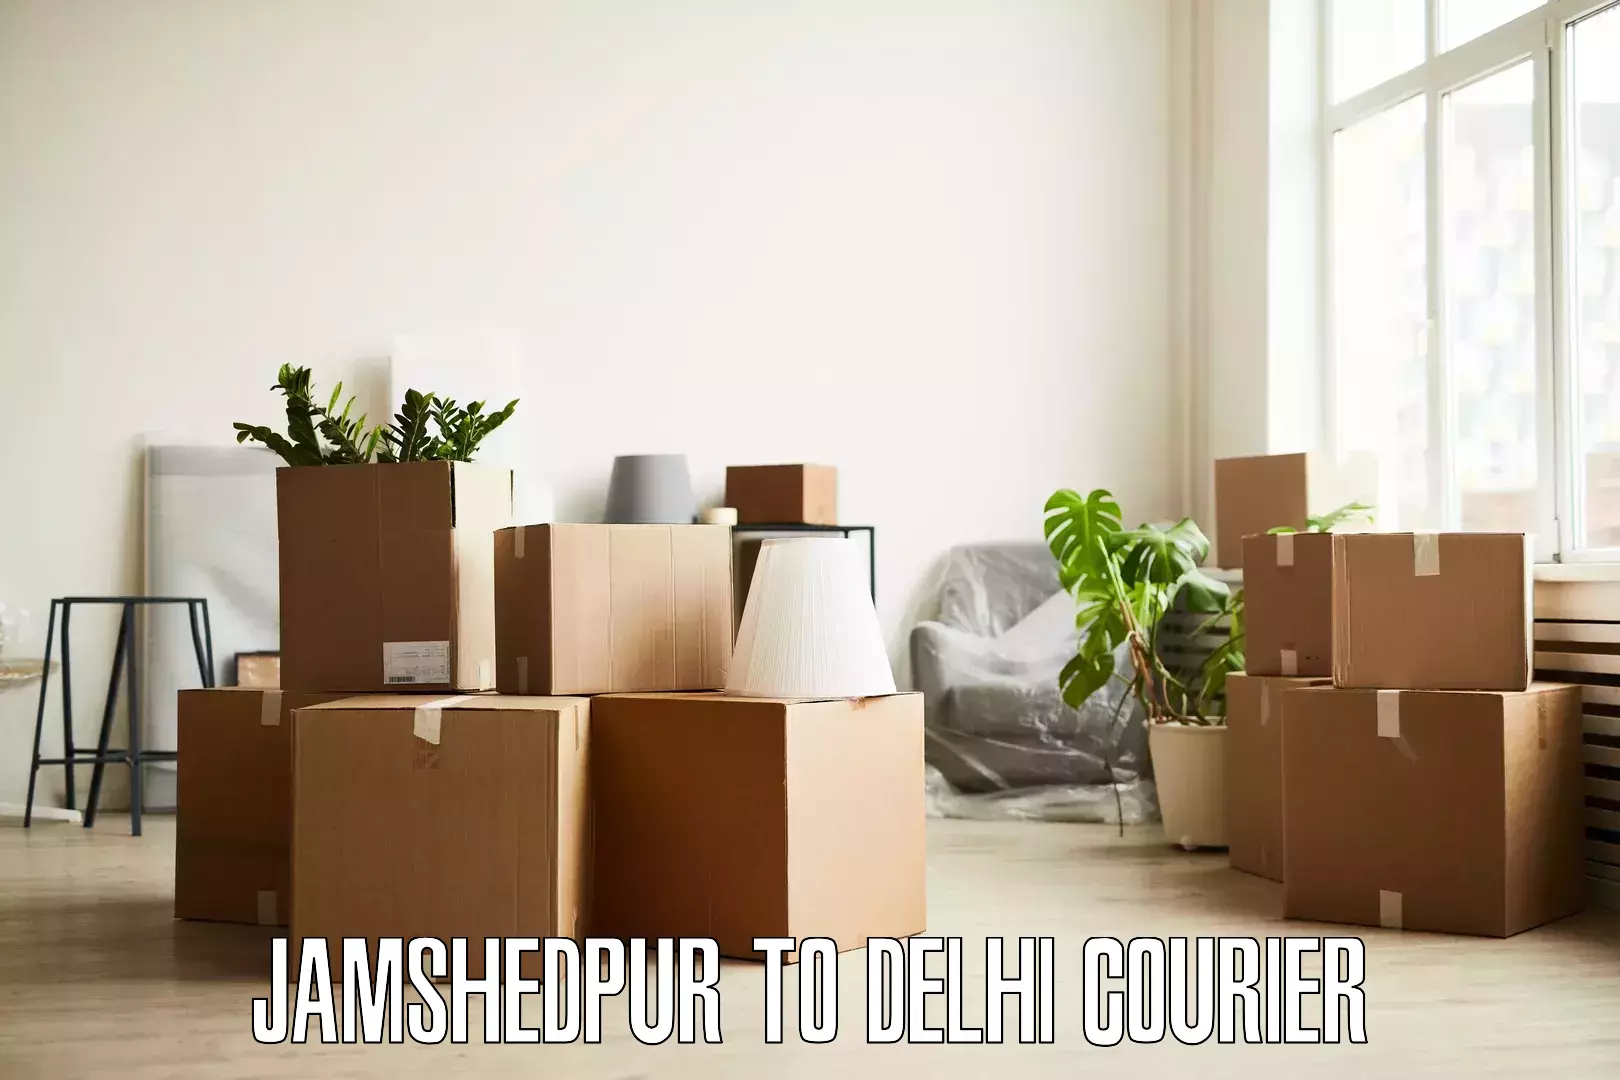 Skilled furniture movers in Jamshedpur to Lodhi Road